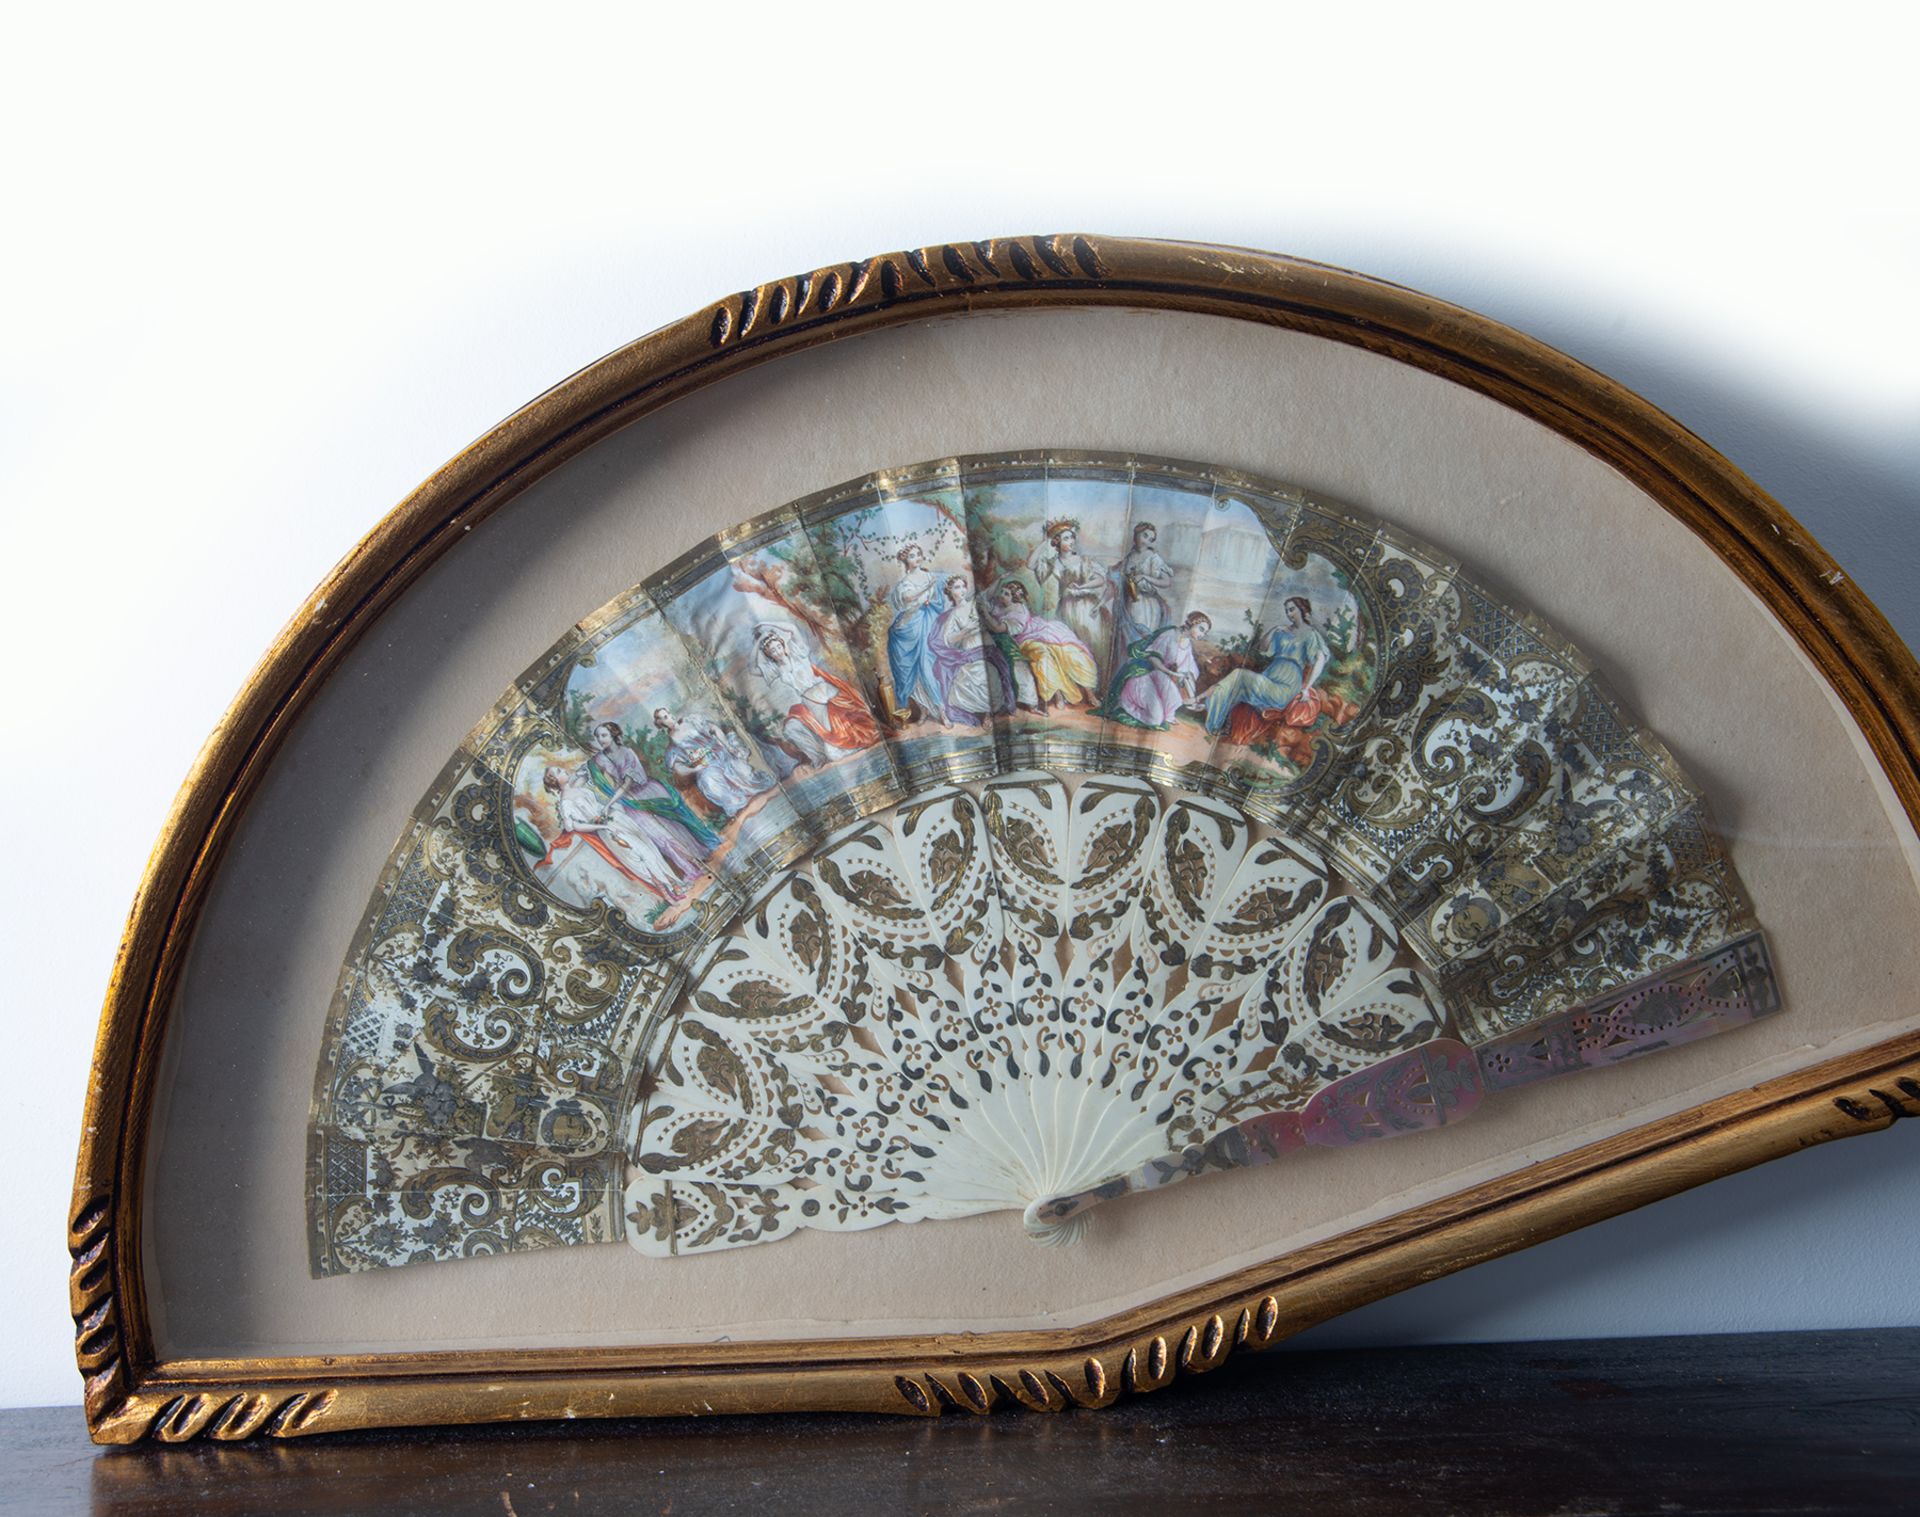 Austrian fan profusely gilded with flourishes and bathing scene painted in oil, 19th century